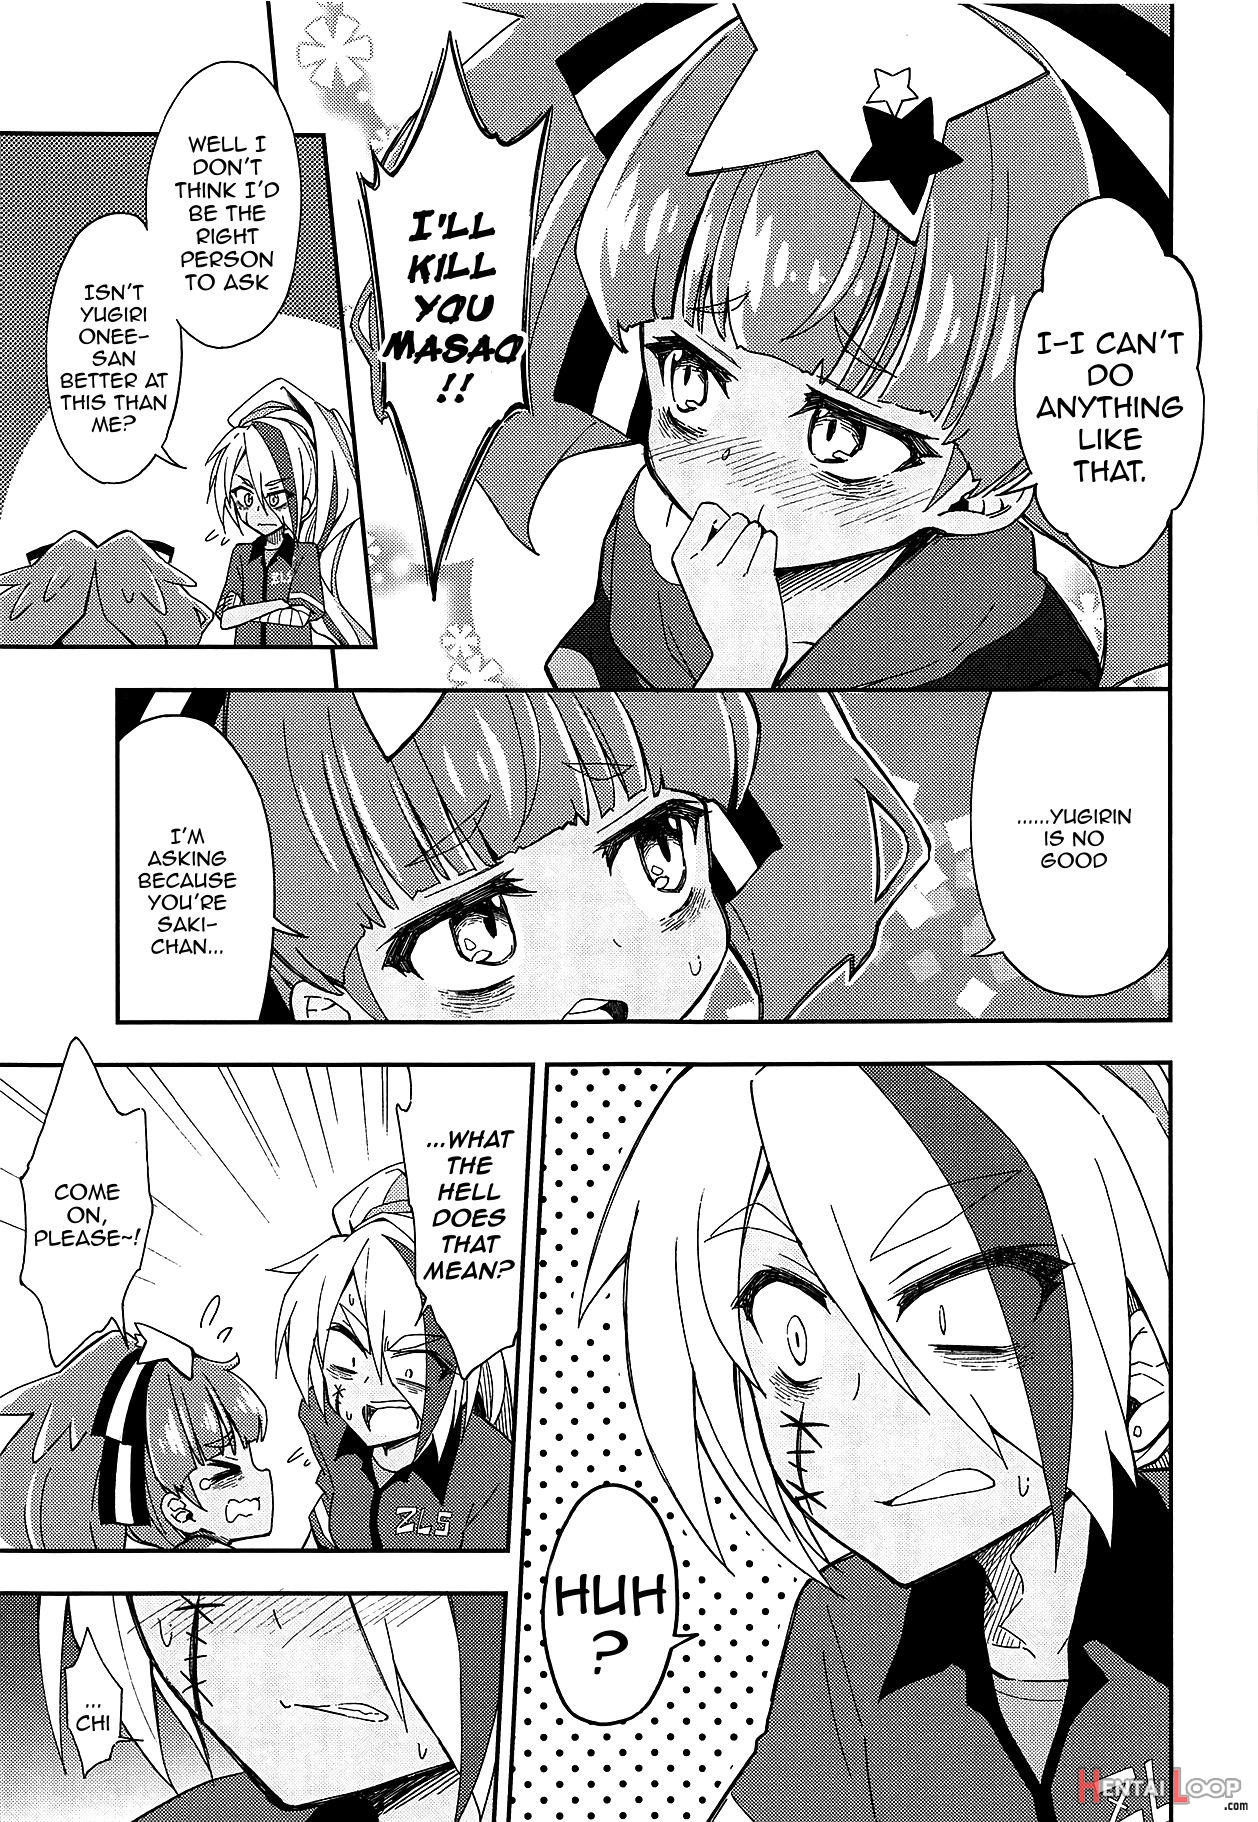 Lovely Girls' Lily Vol. 18 page 5